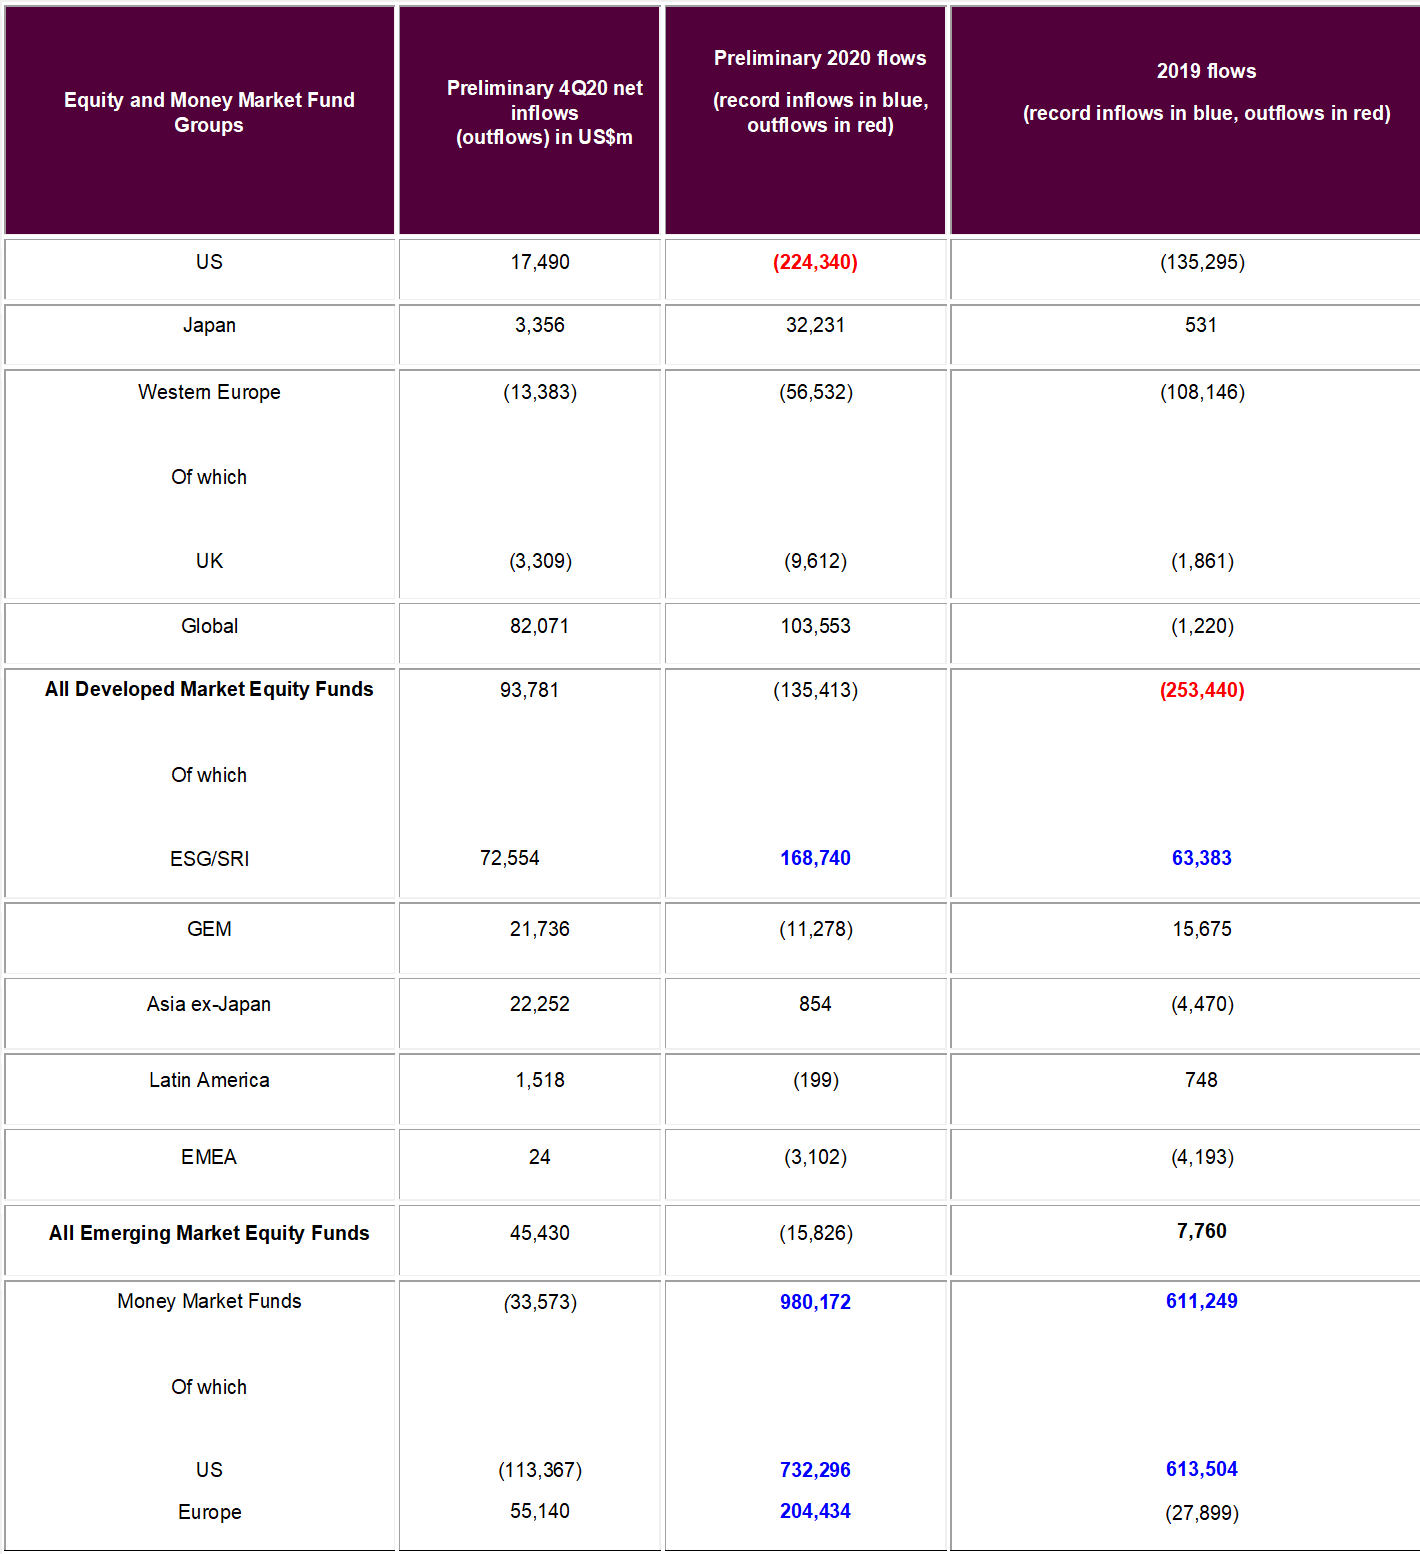 Table depicting 'Equity and money market fund groups, showing their preliminary Q4 2020 net inflows, and their 2020 and 2019 flows'.